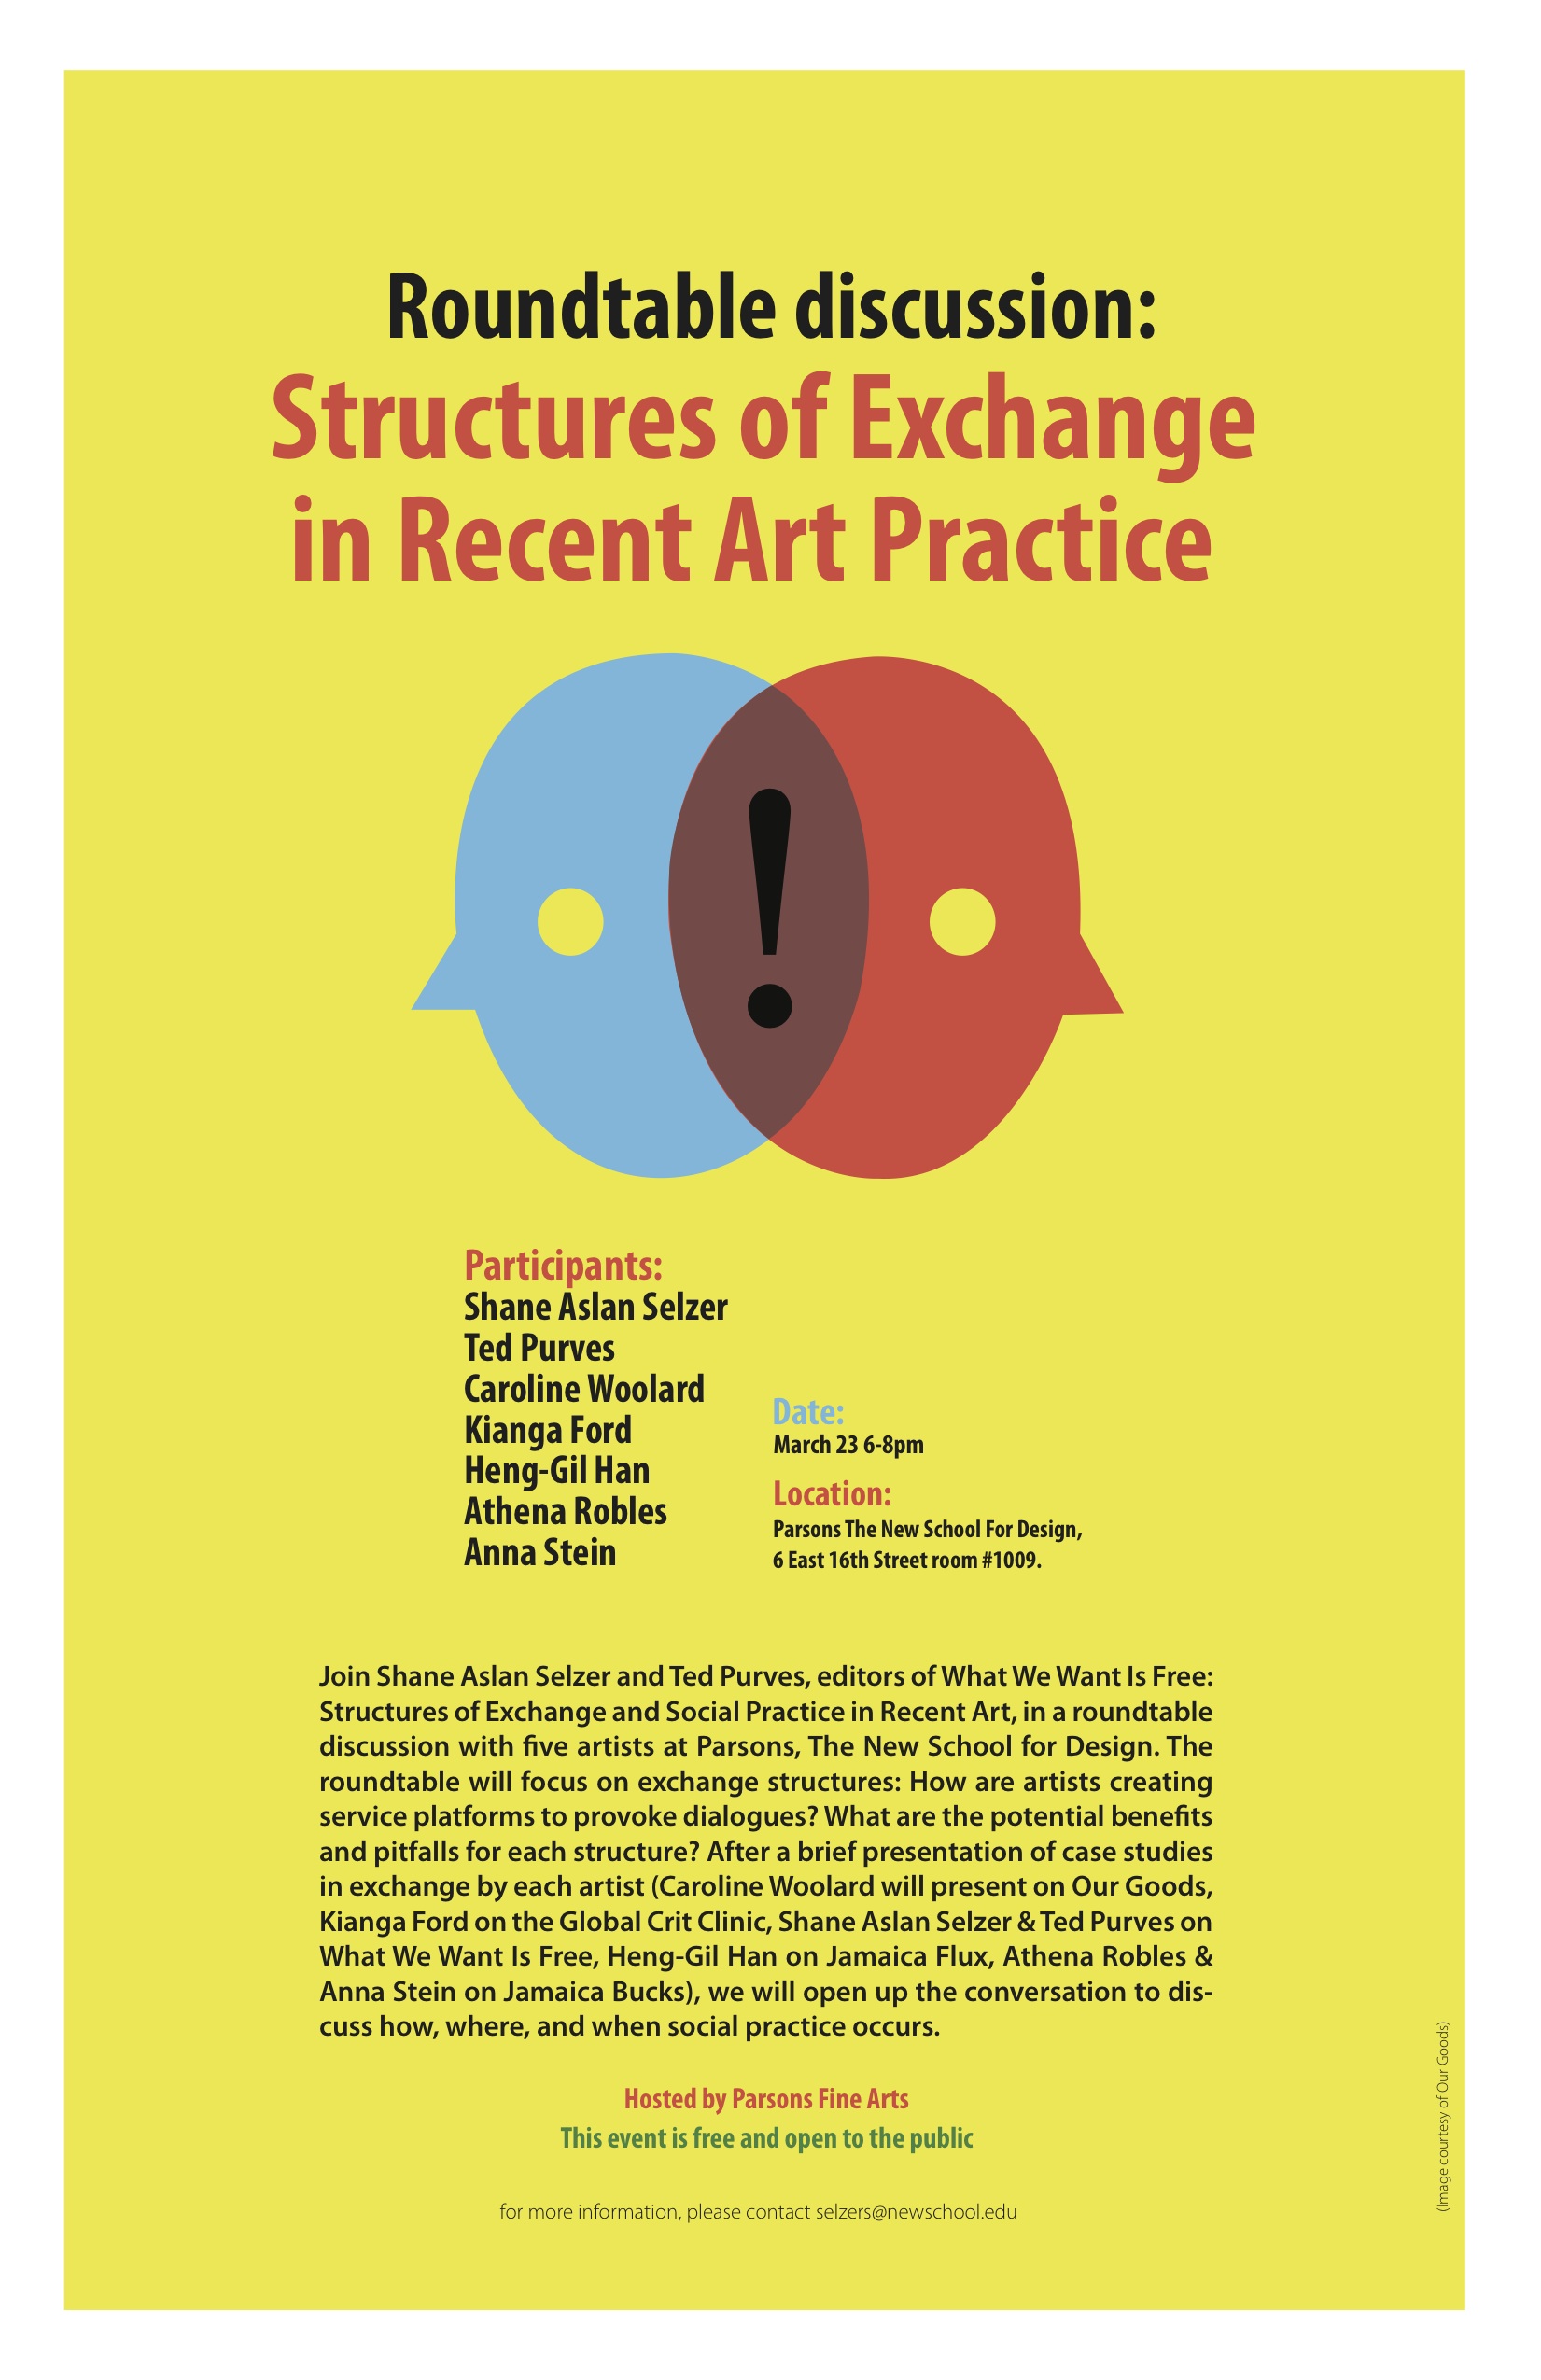 Fine Arts Hosts Roundtable Discussion: Structure of Exchange in Recent Art Practice